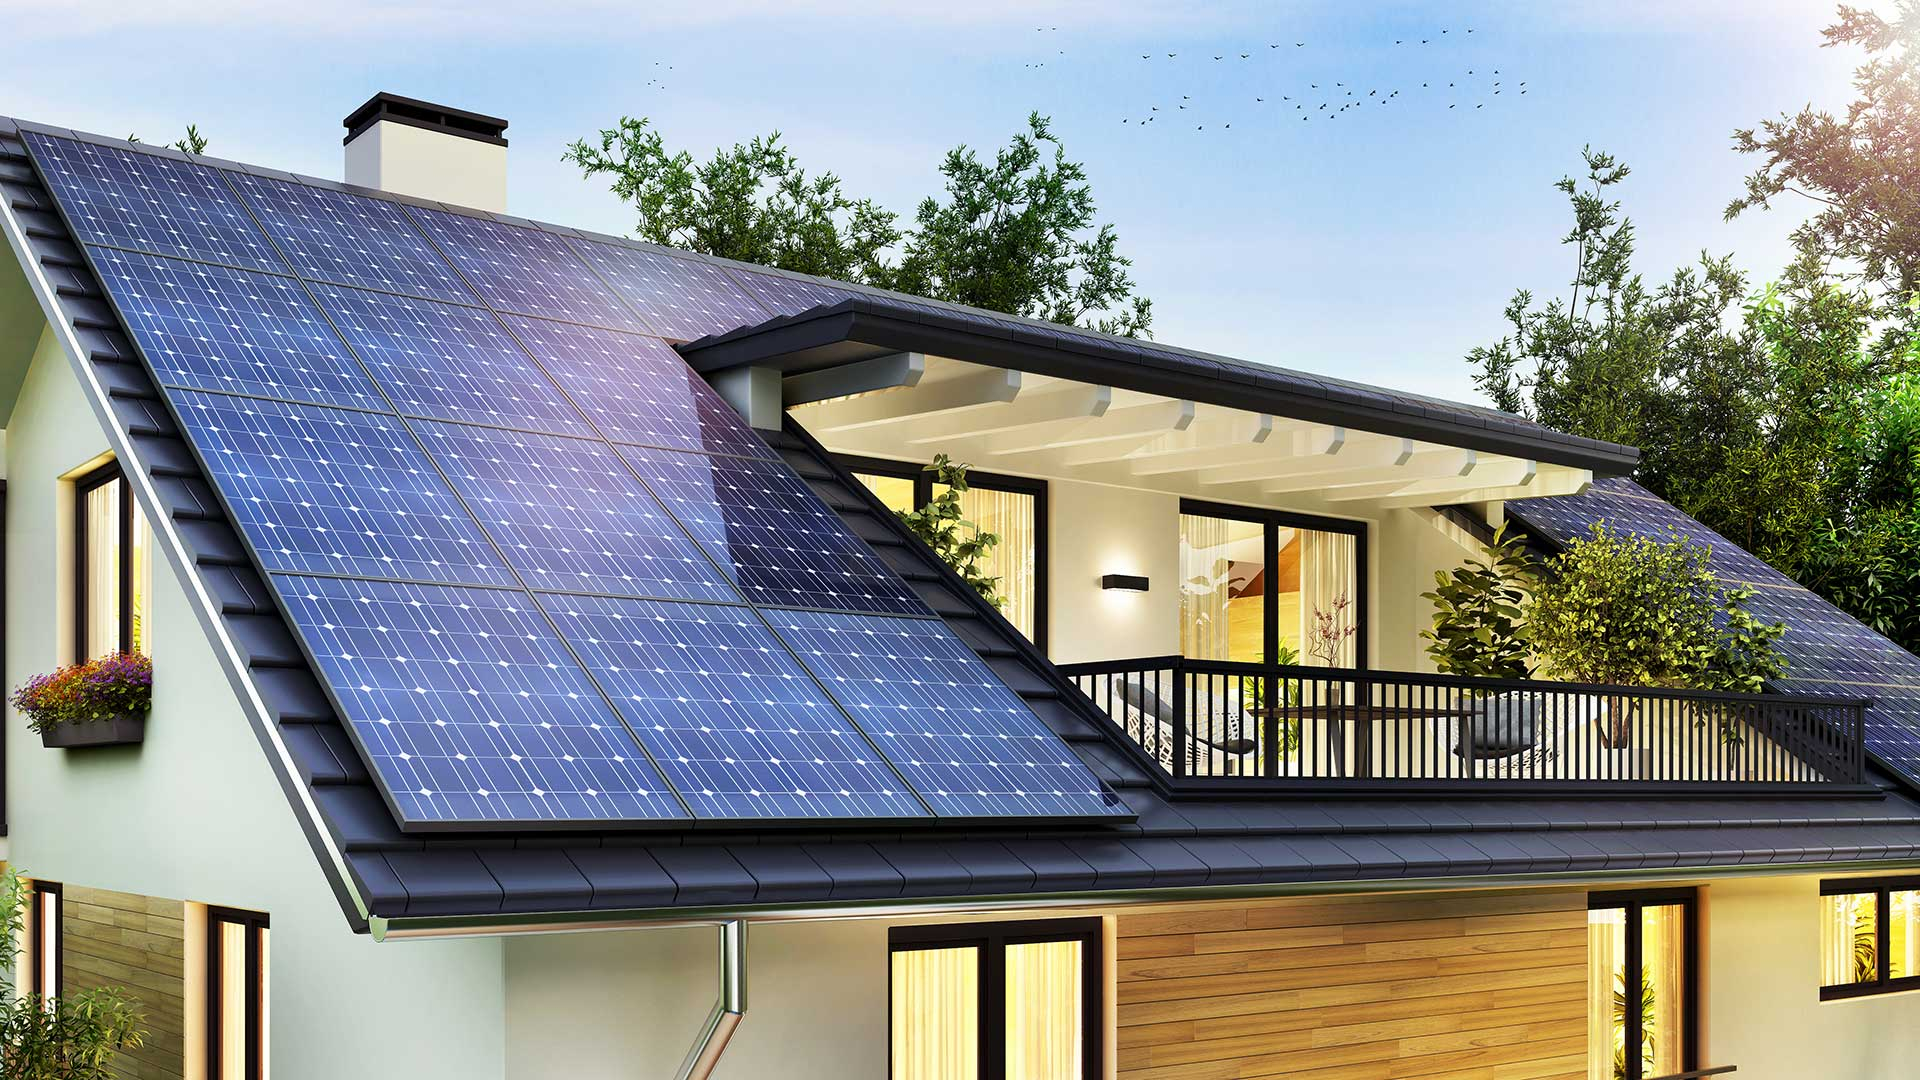 1920x1080 Interested in Free Solar Panels? Read the Fine Print | Ep. 92 Today's Homeowner